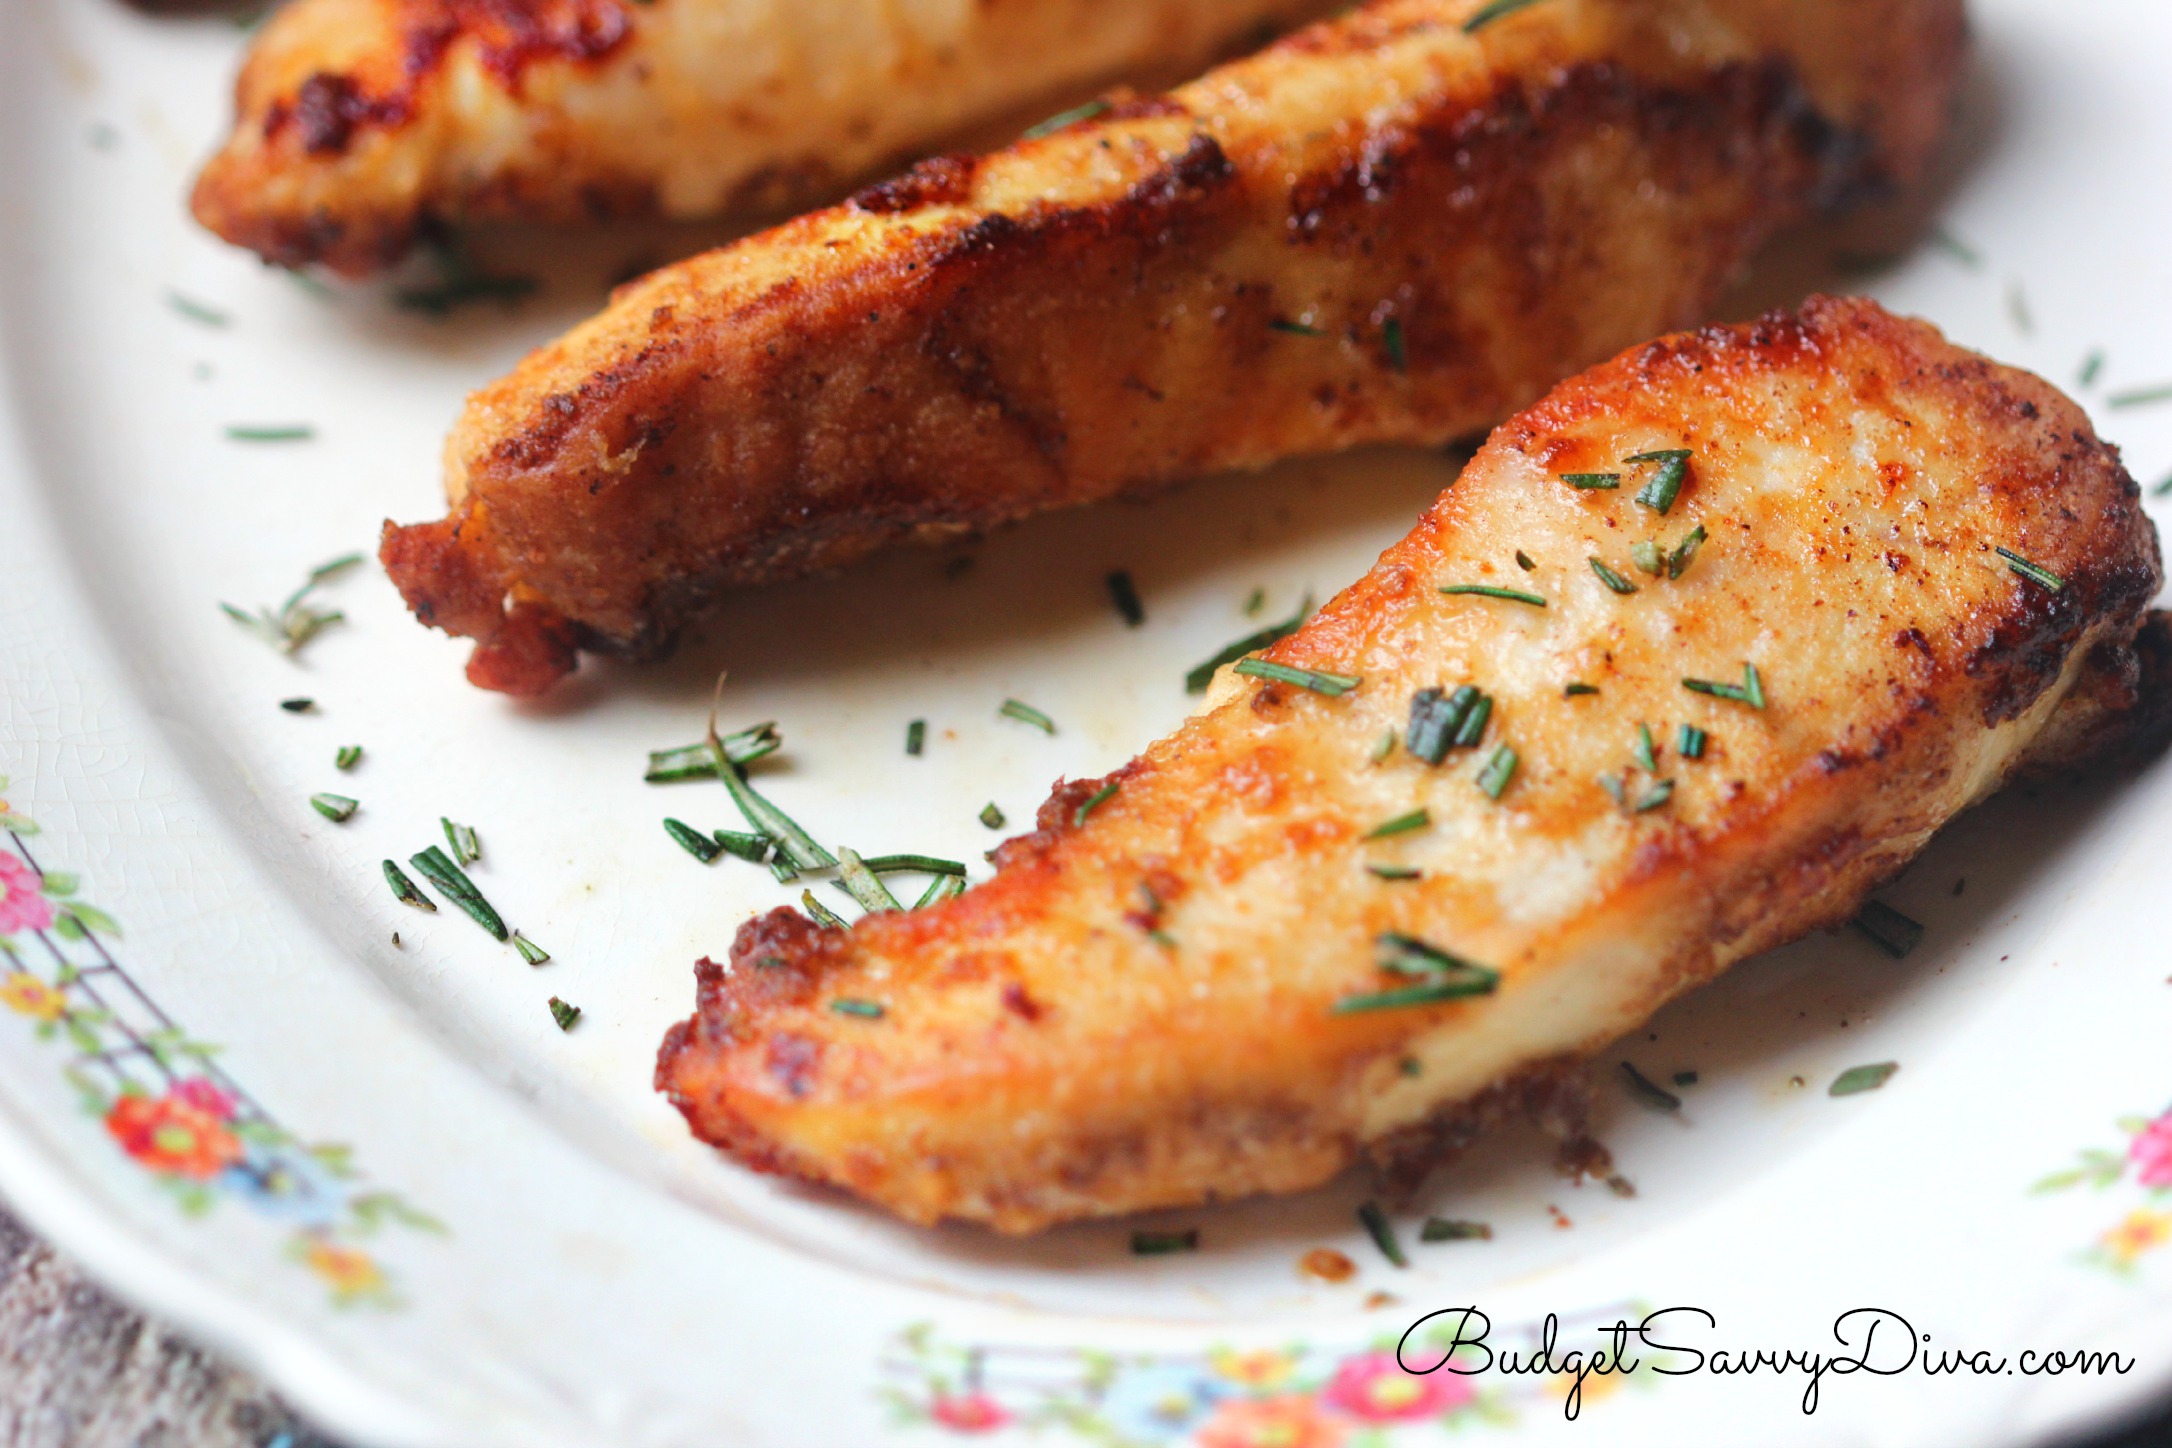 The Best Baked Chicken Ever Recipe - Marie Recipe - Budget Savvy Diva